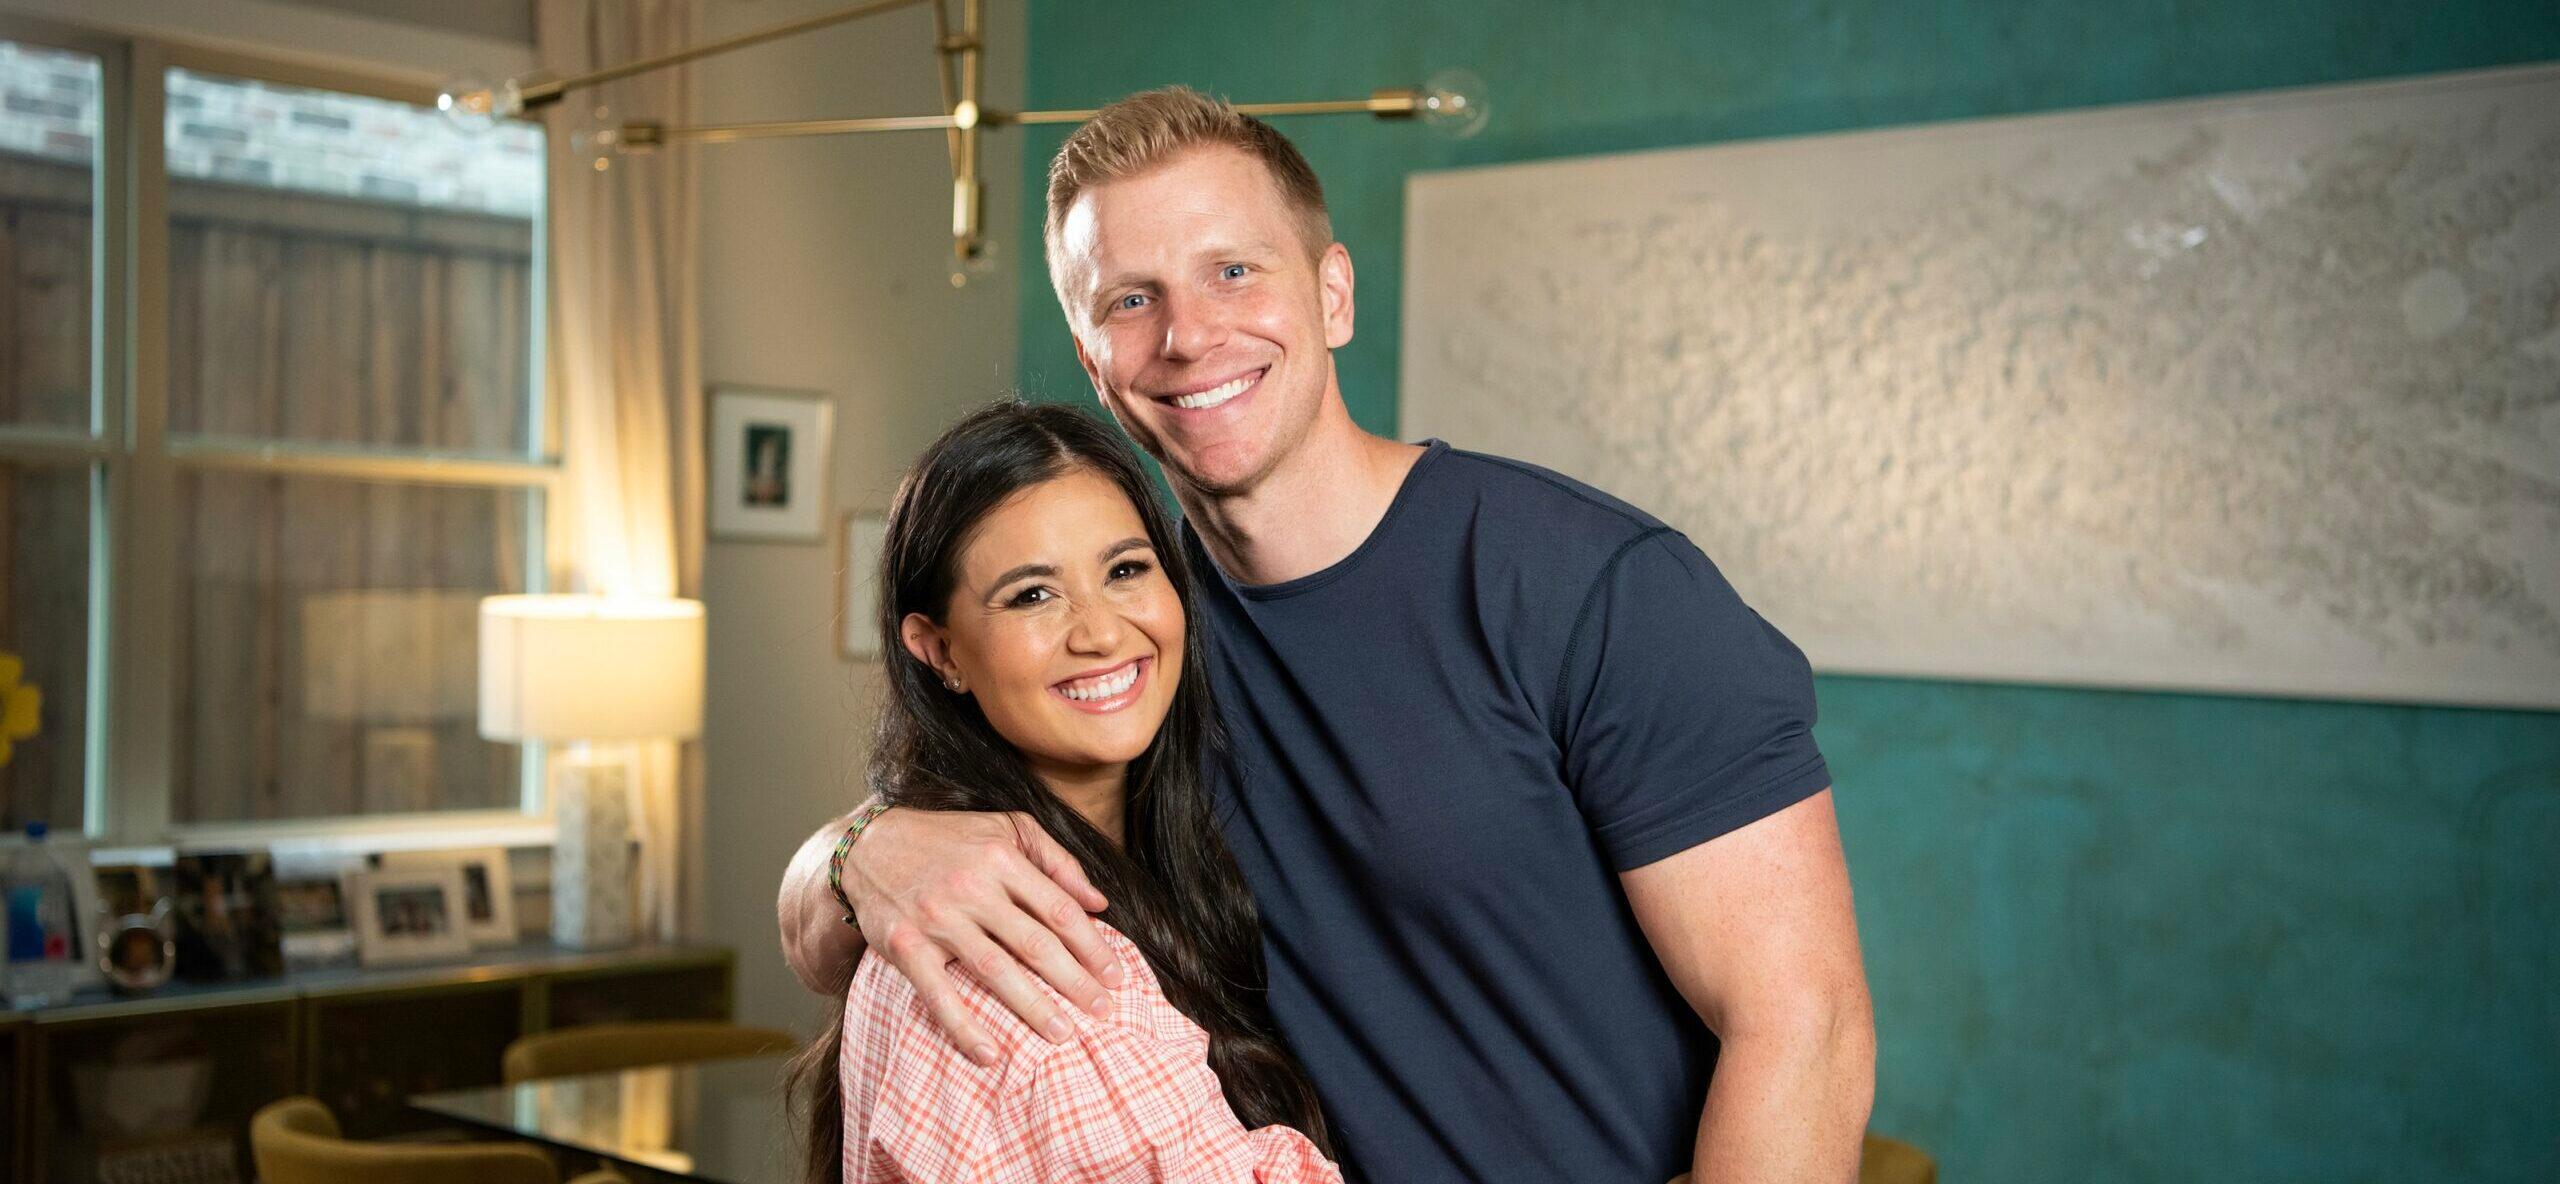 Bachelor stars Sean and Catherine Lowe reveal collective 37lbs weight loss on Nutrisystem couples plan